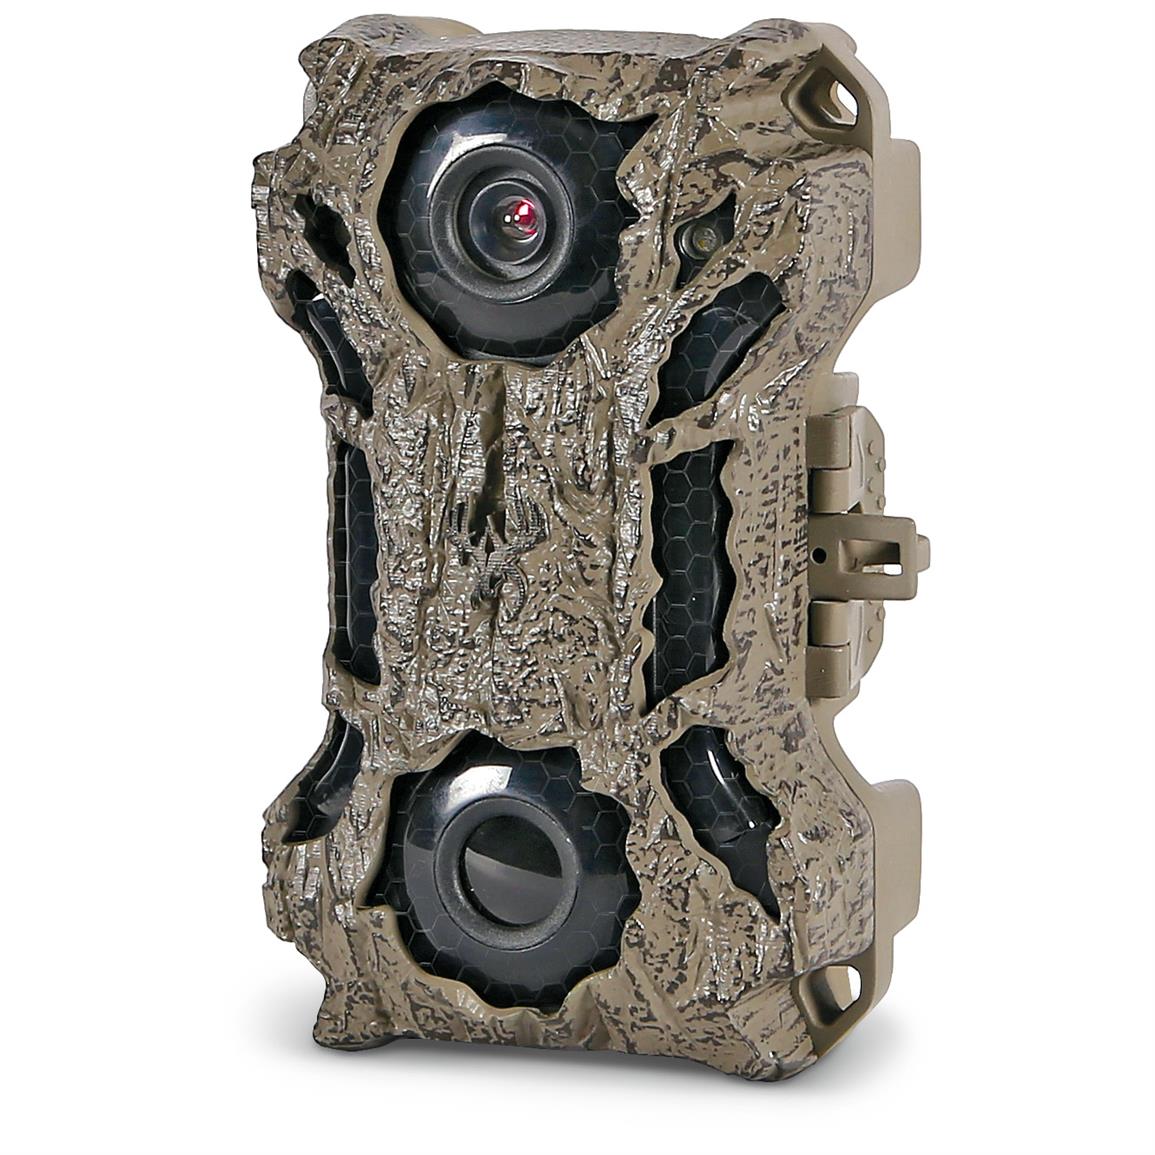 Wildgame innovations trail camera software